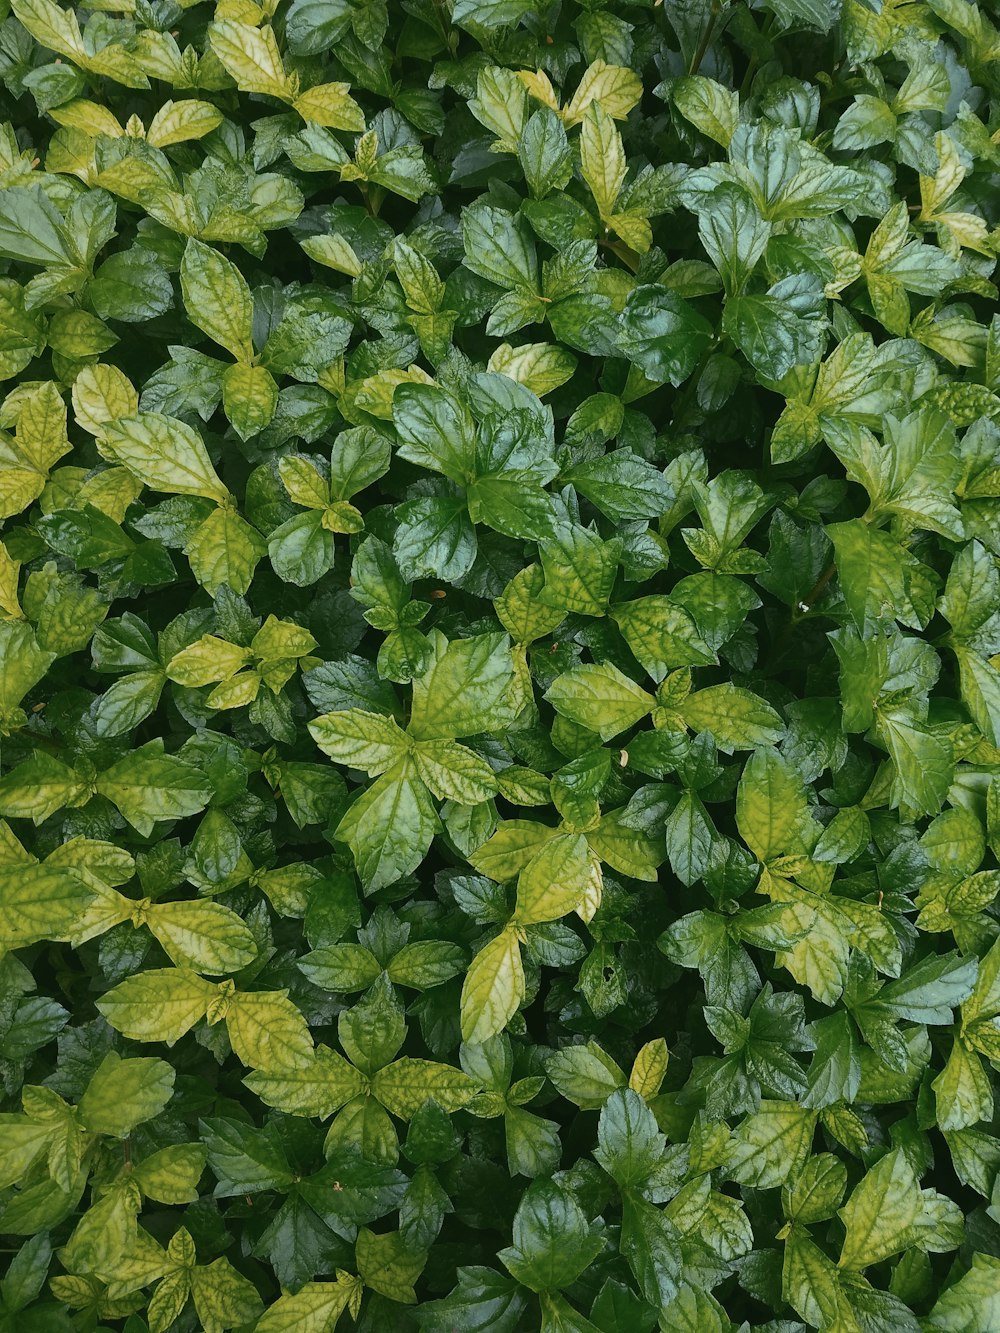 ovate green-leafed plants